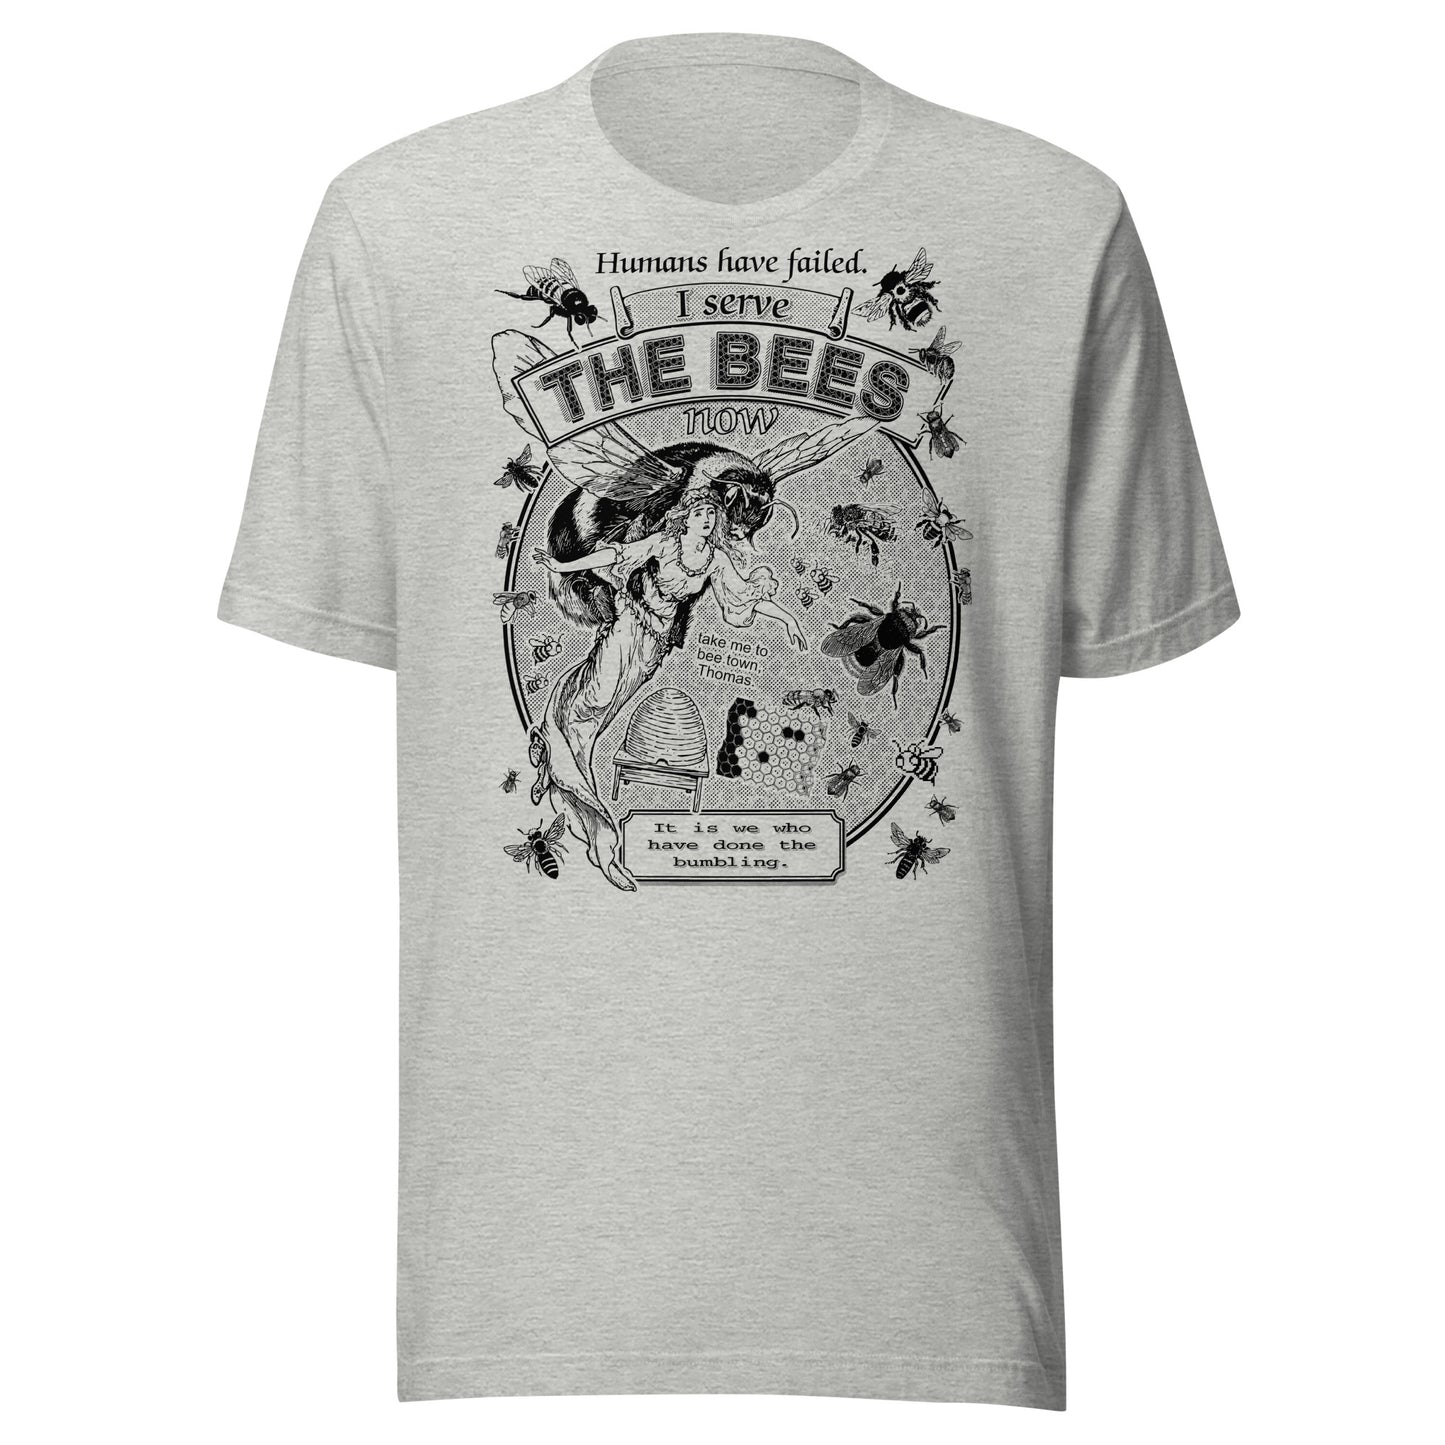 "I Serve The Bees Now" Unisex t-shirt